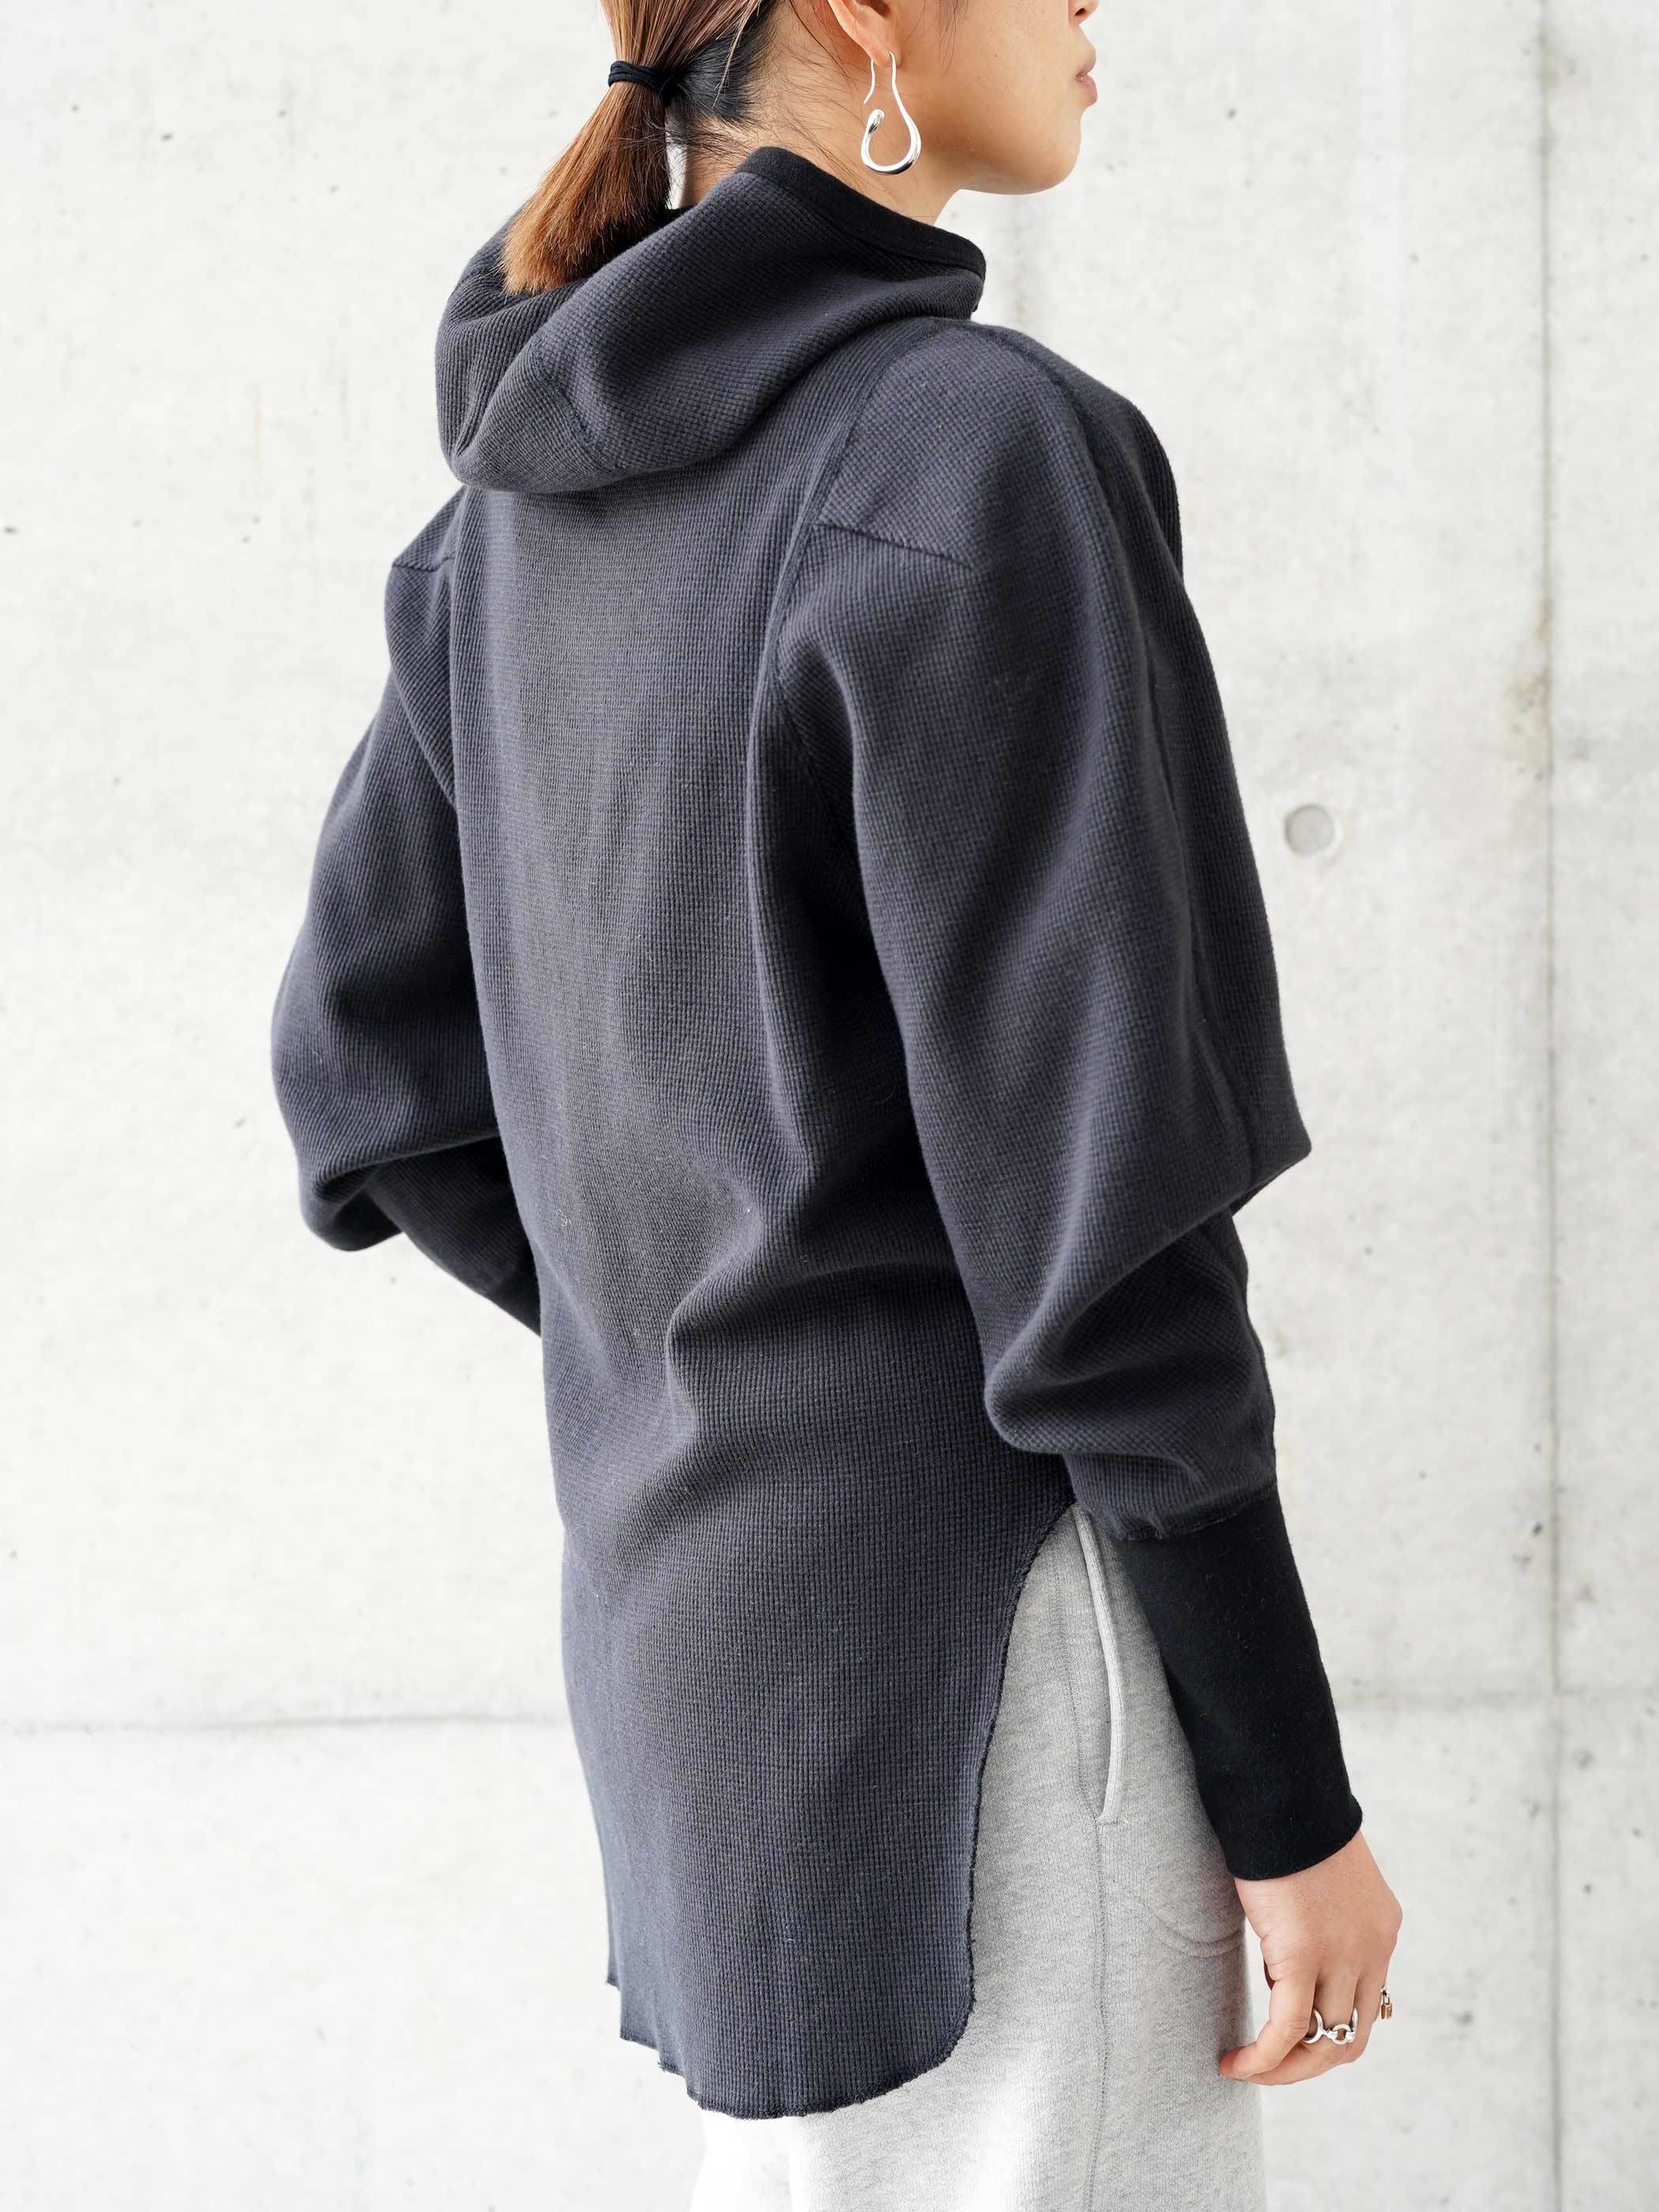 Hooded Thermal Shirts